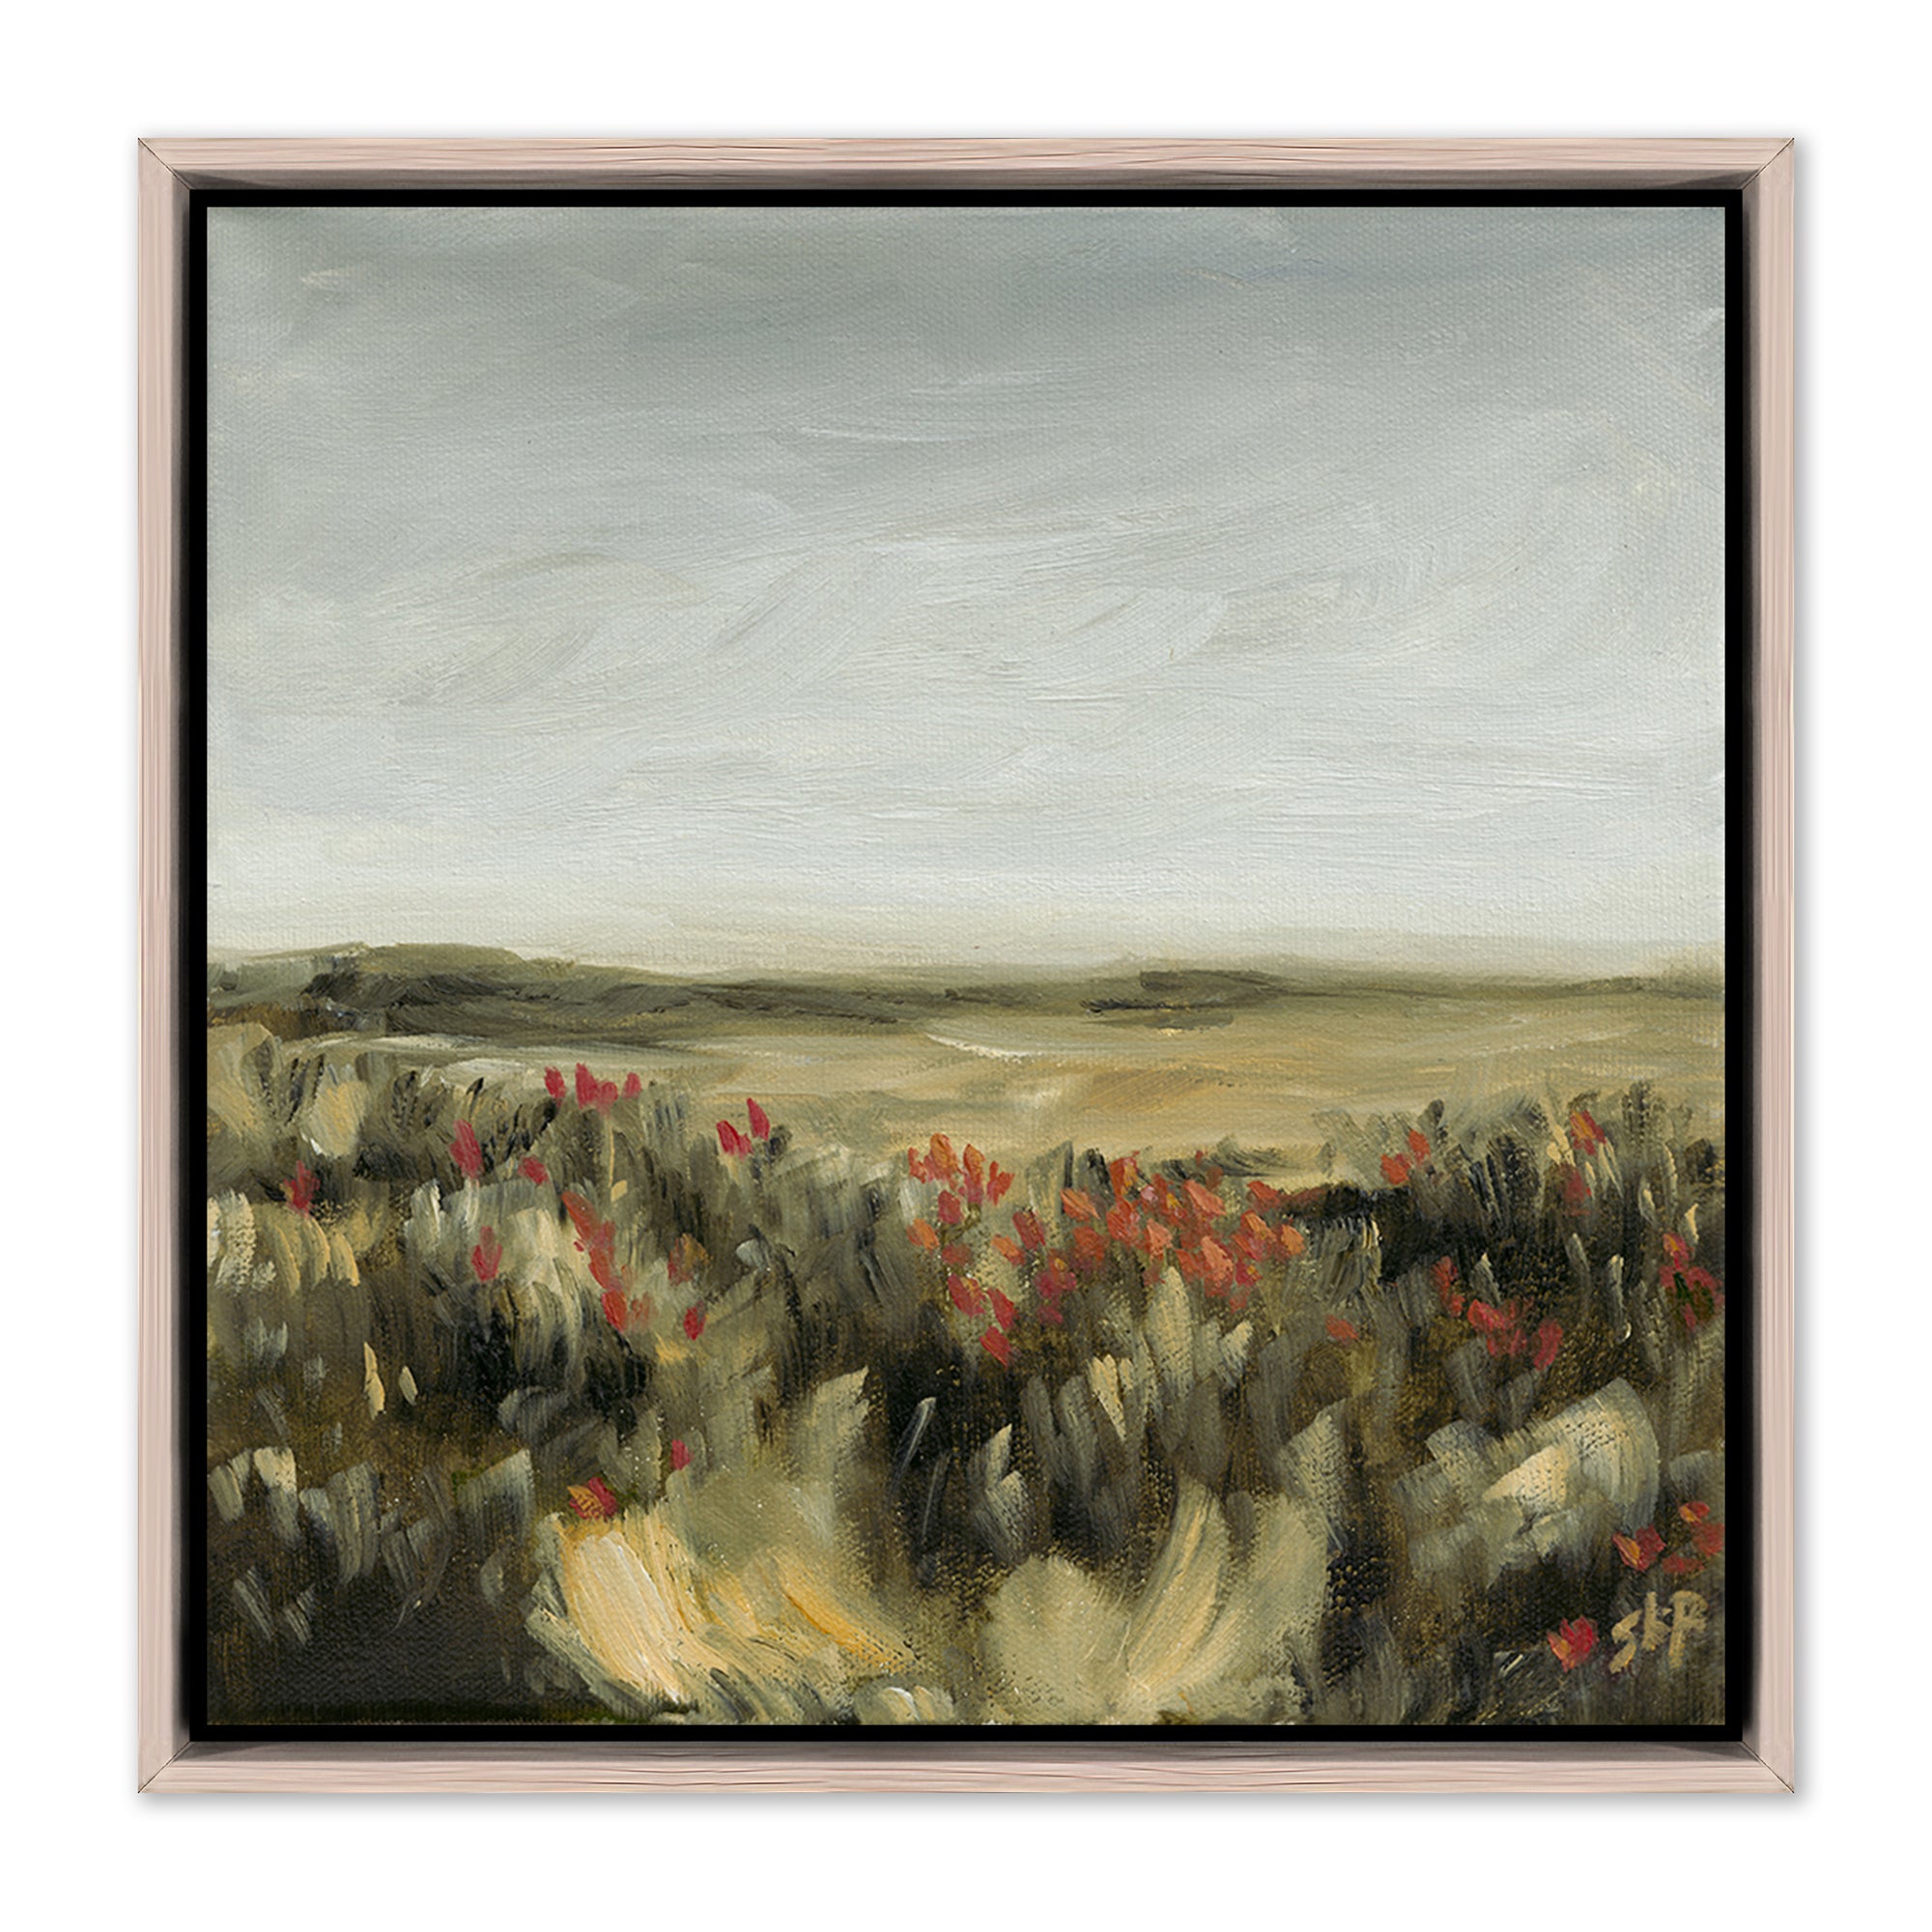 Framed wall art called Flower Field by Shaina Page $548.00